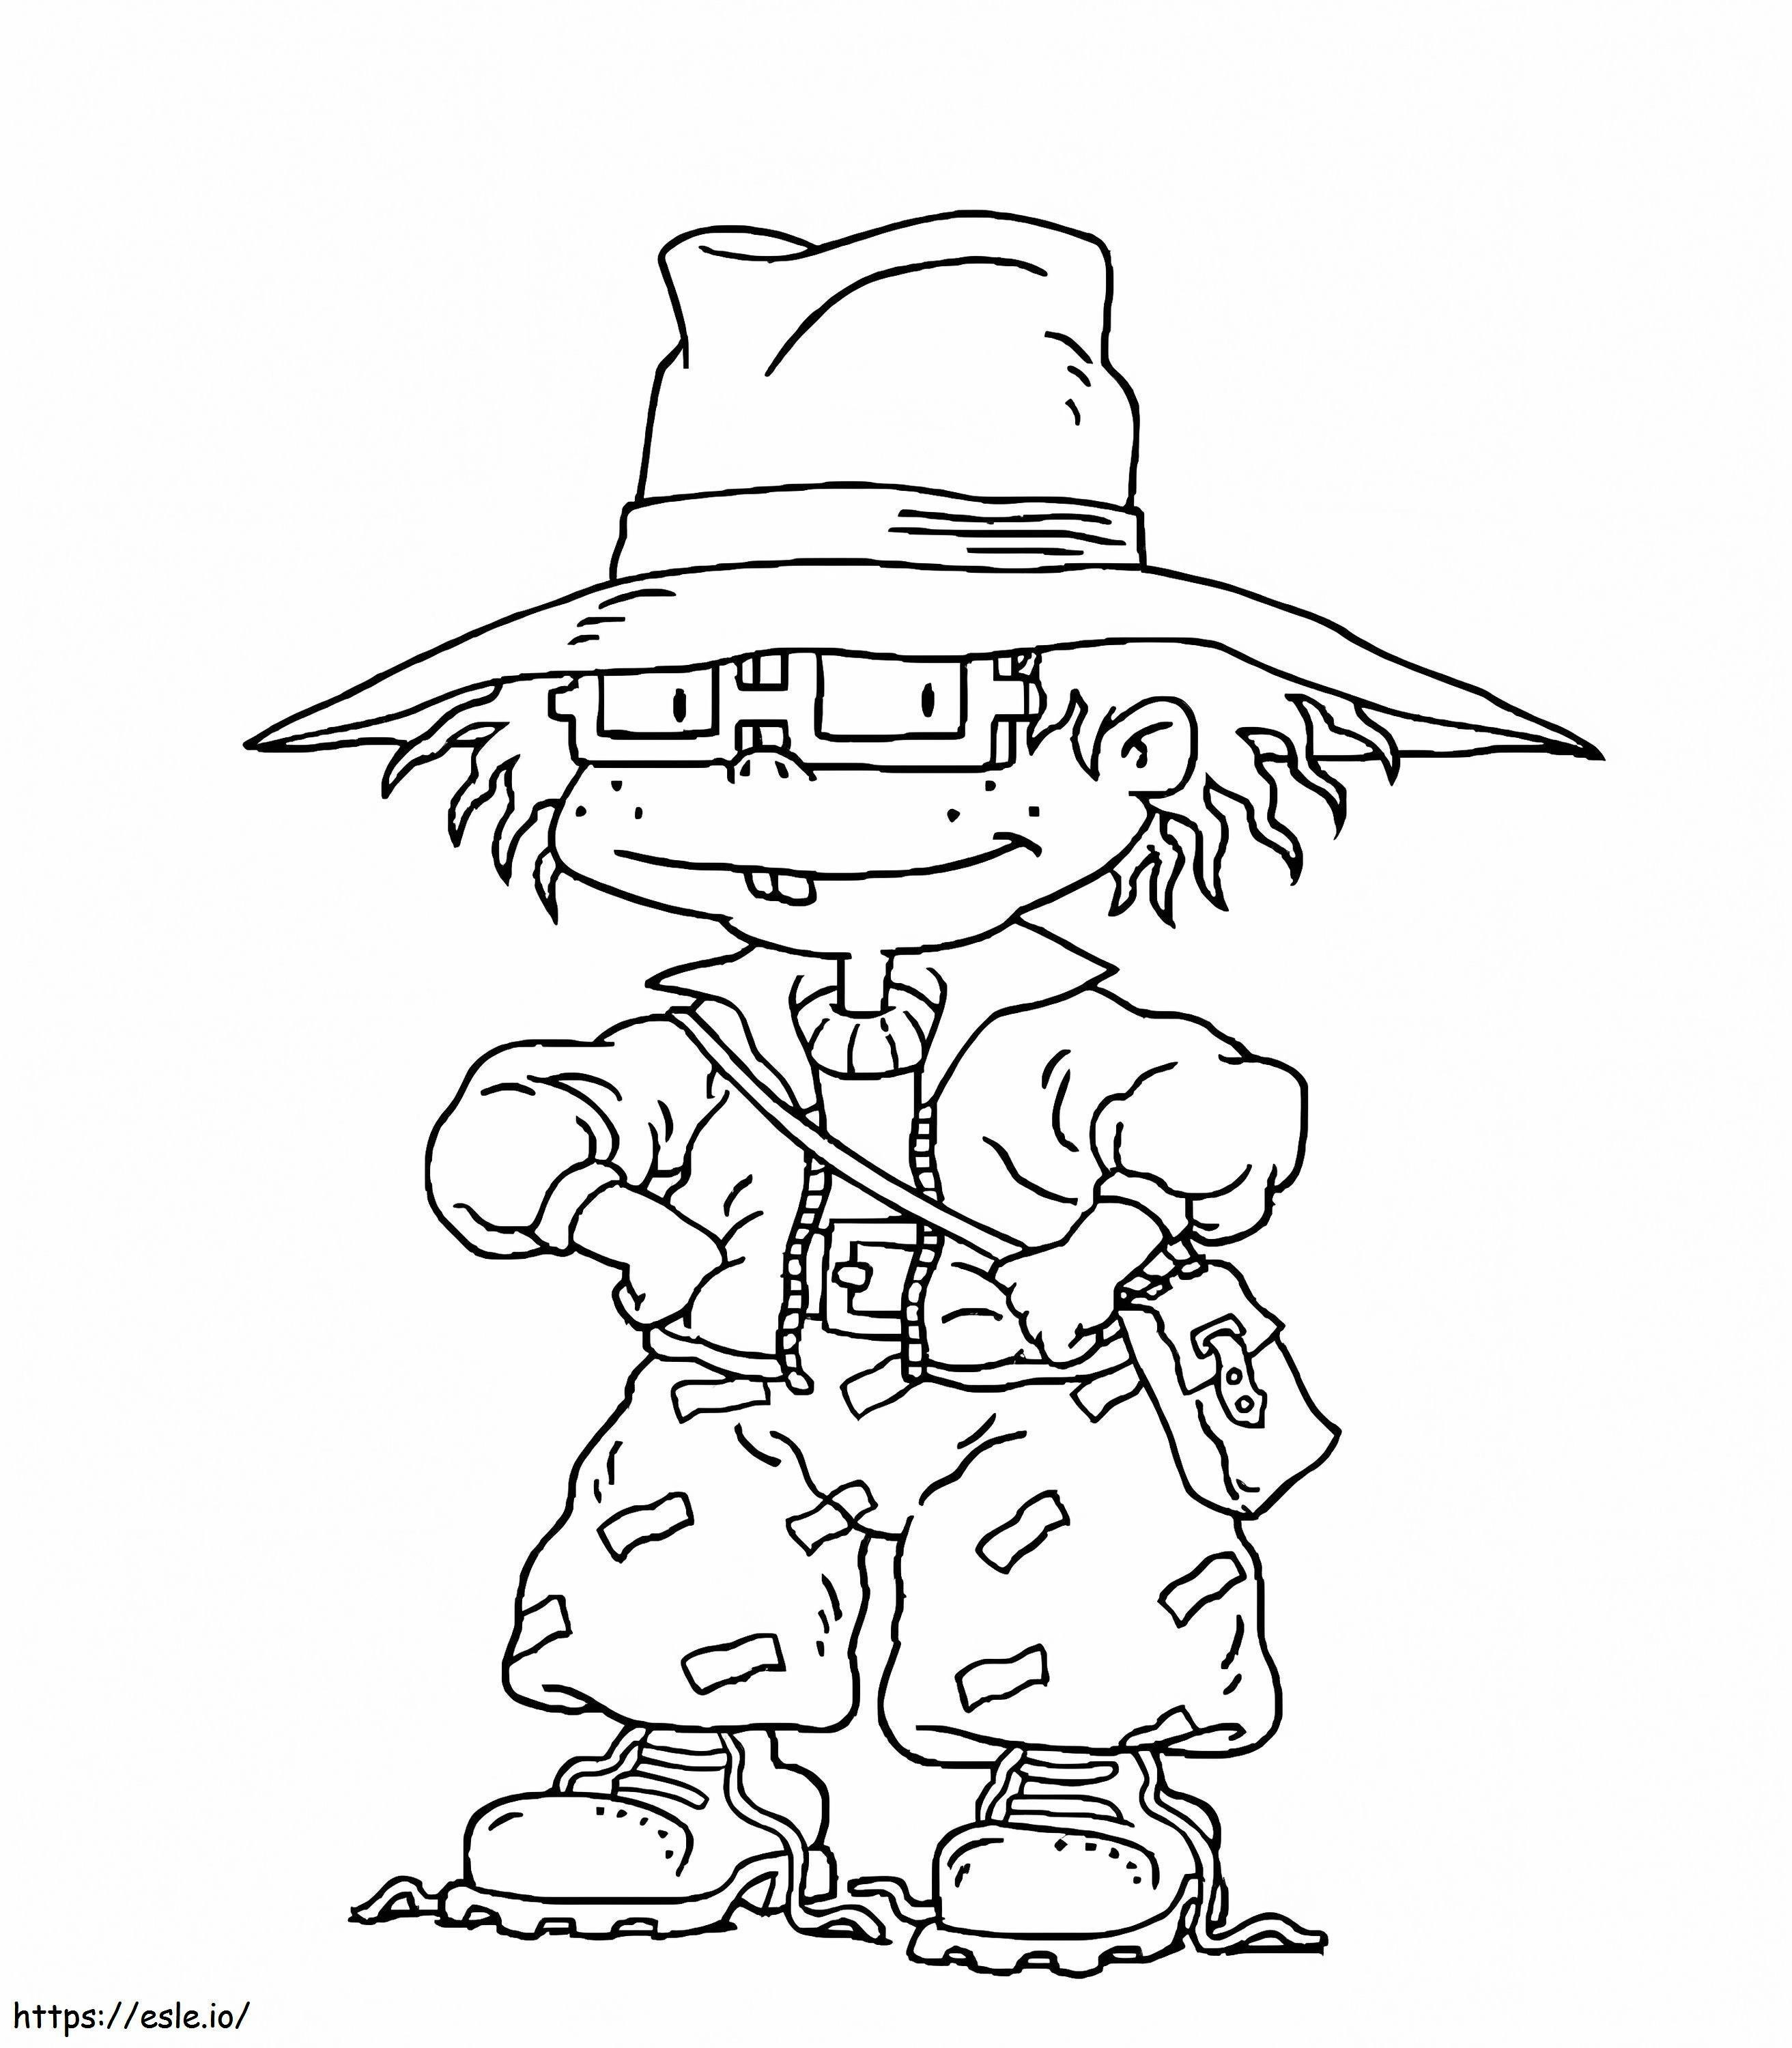 Funny Chuckie coloring page